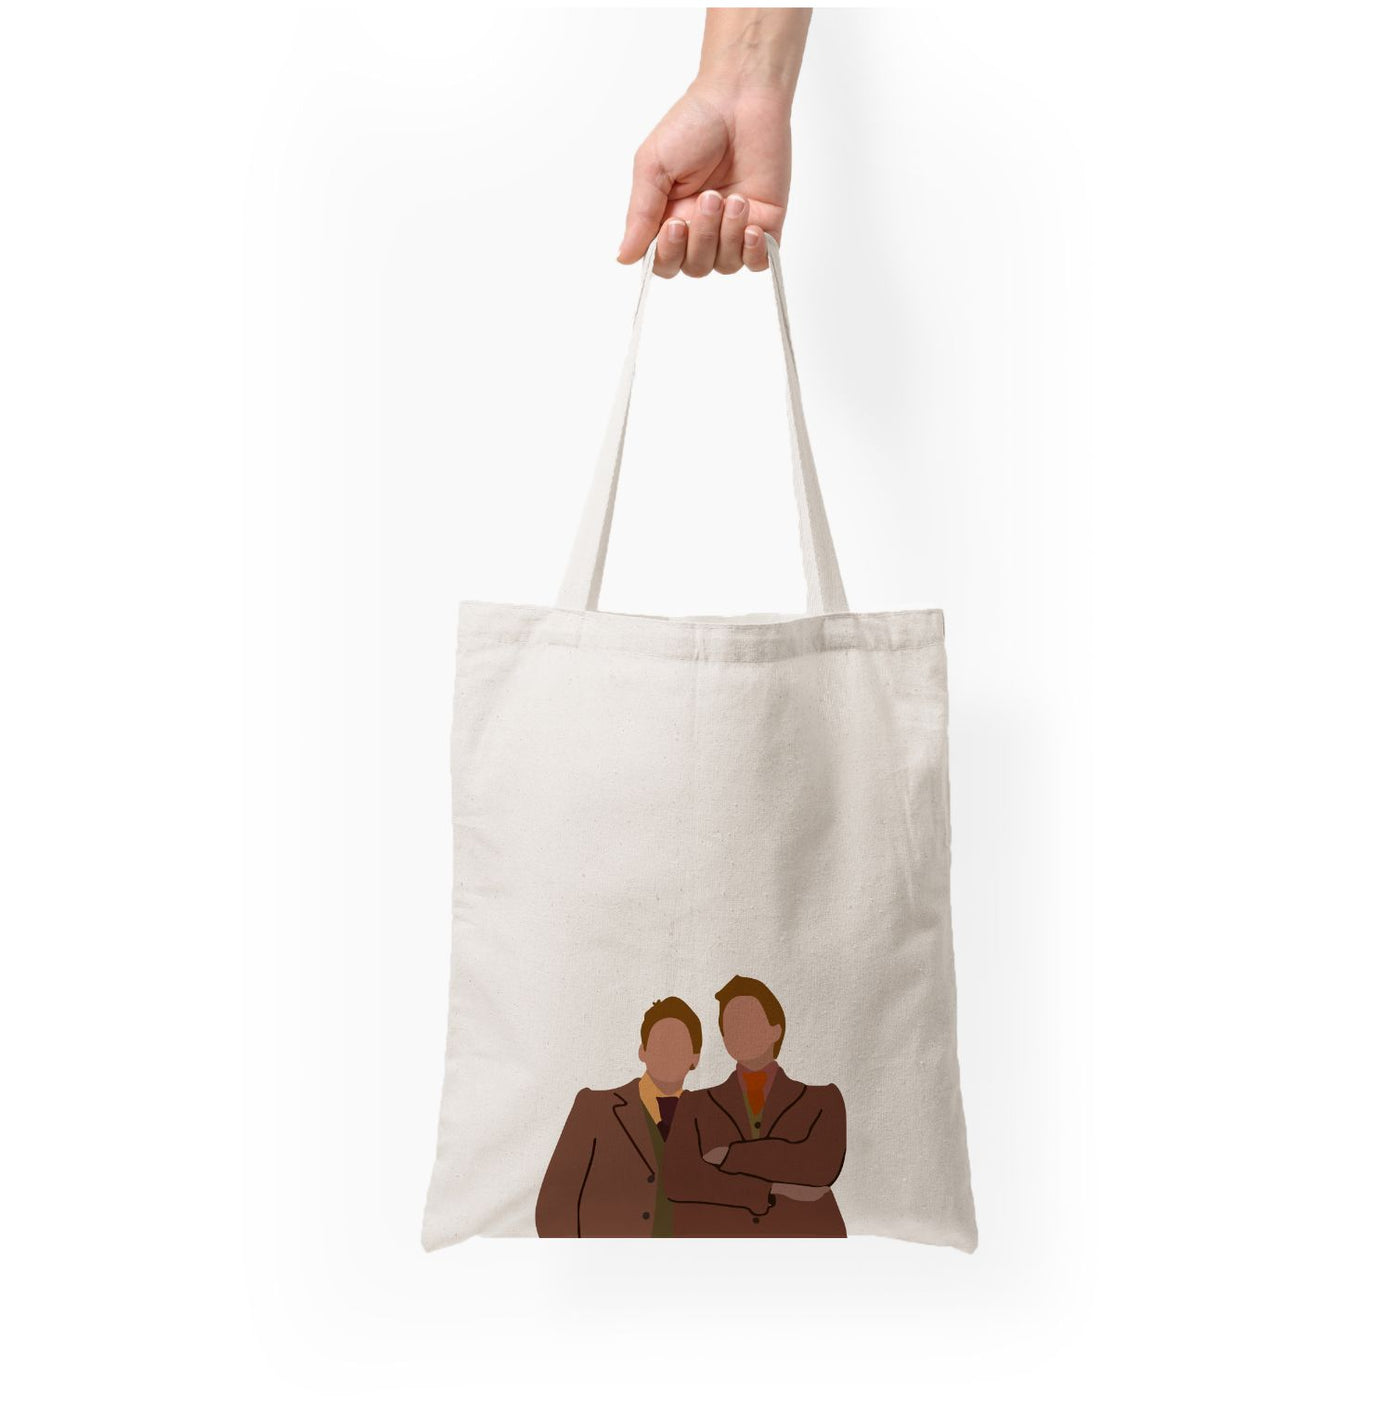 Fred And George - Harry Potter Tote Bag